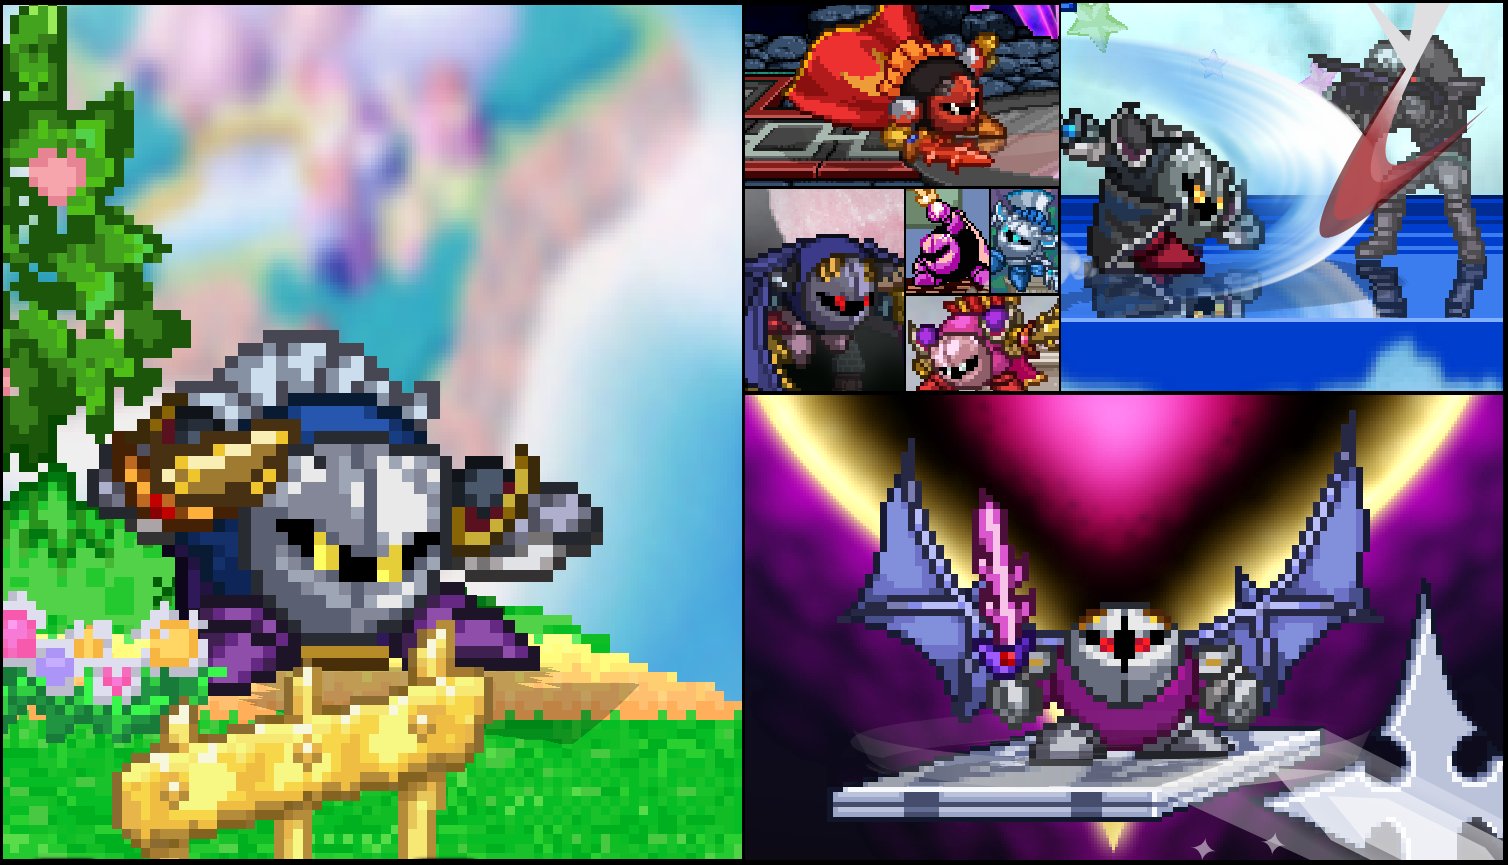 Super smash flash 2 predicted the final reveal (rest in peace ssf2) :  r/SmashBrosUltimate